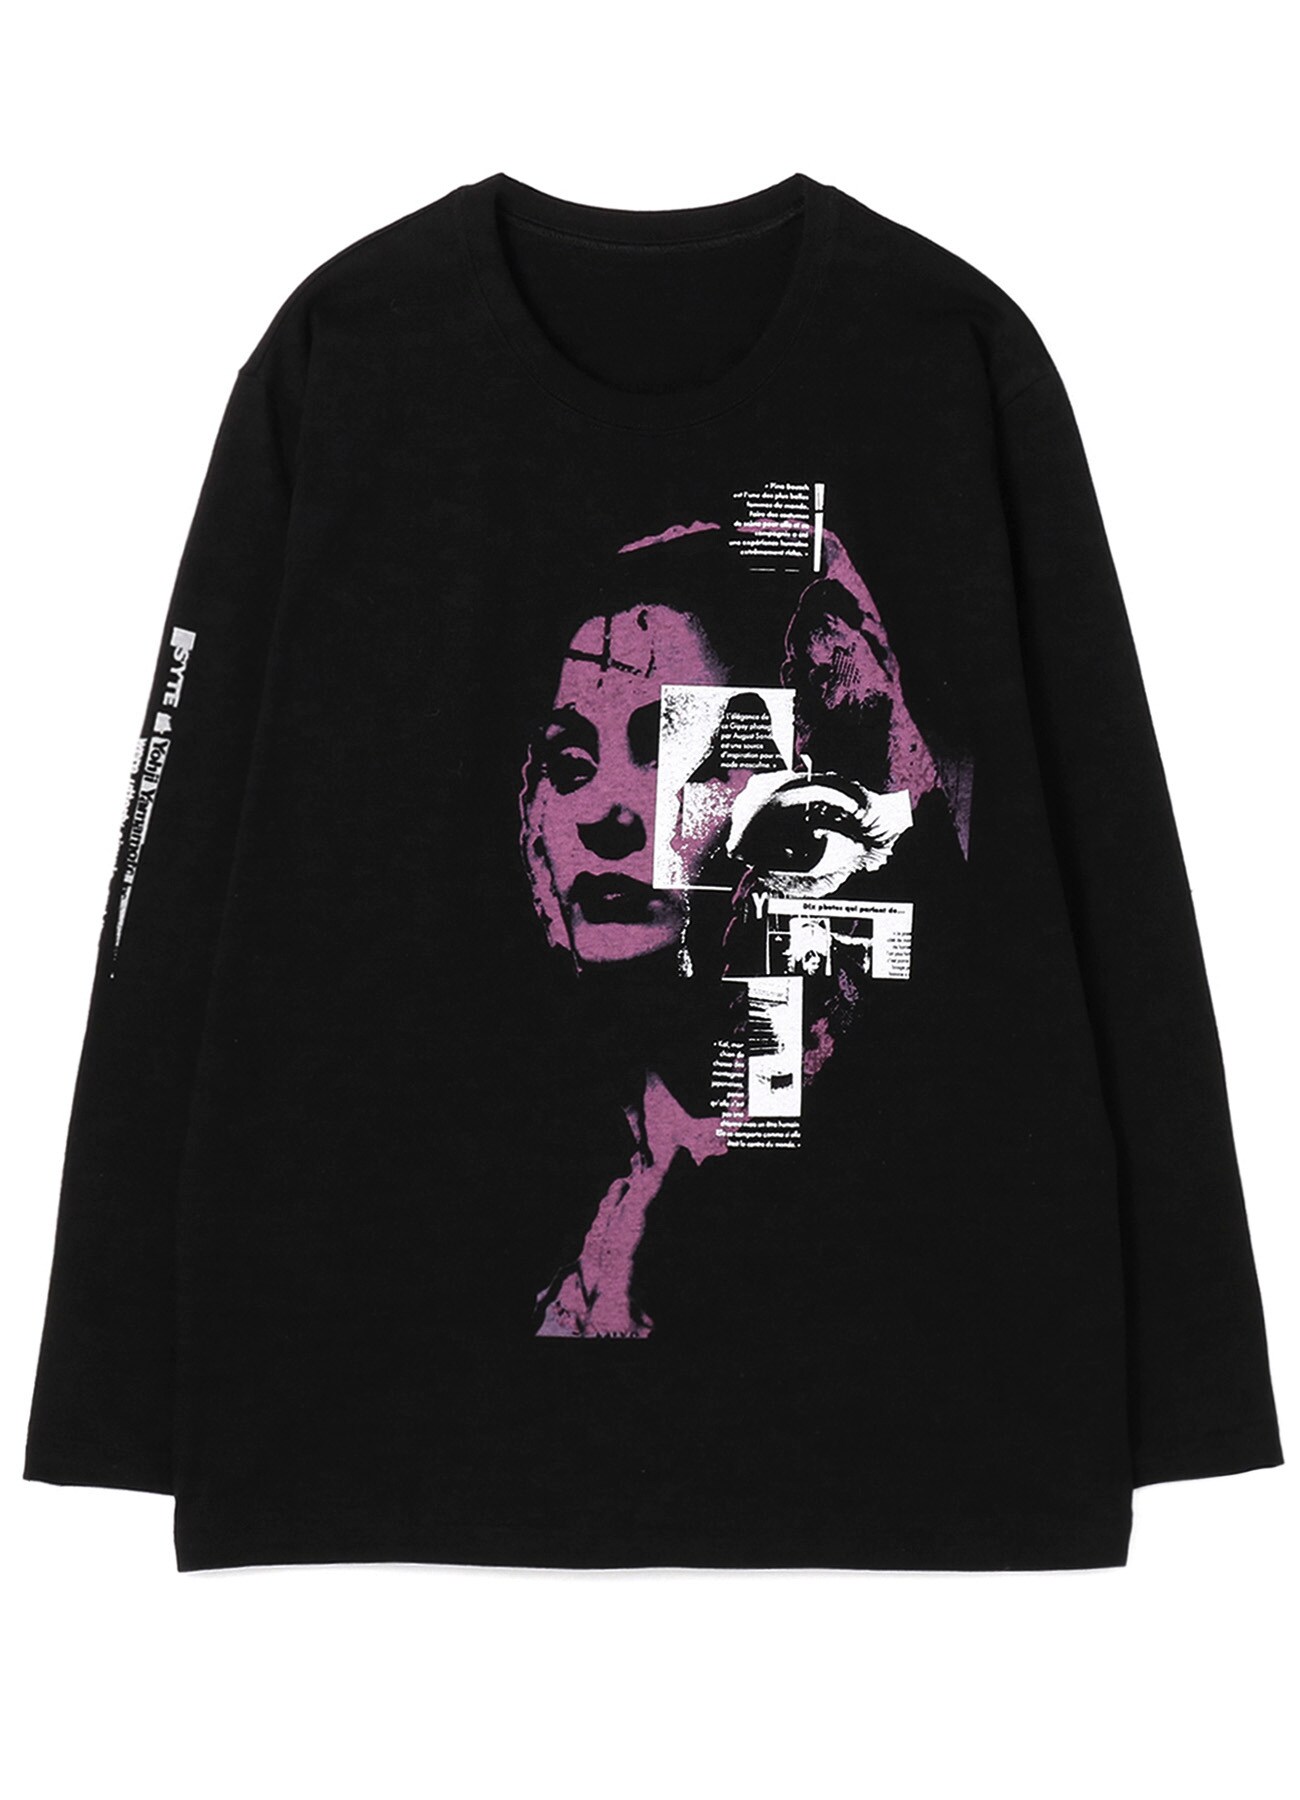 20/Cotton Jersey One-eyed Maria Long Sleeve T-Shirt